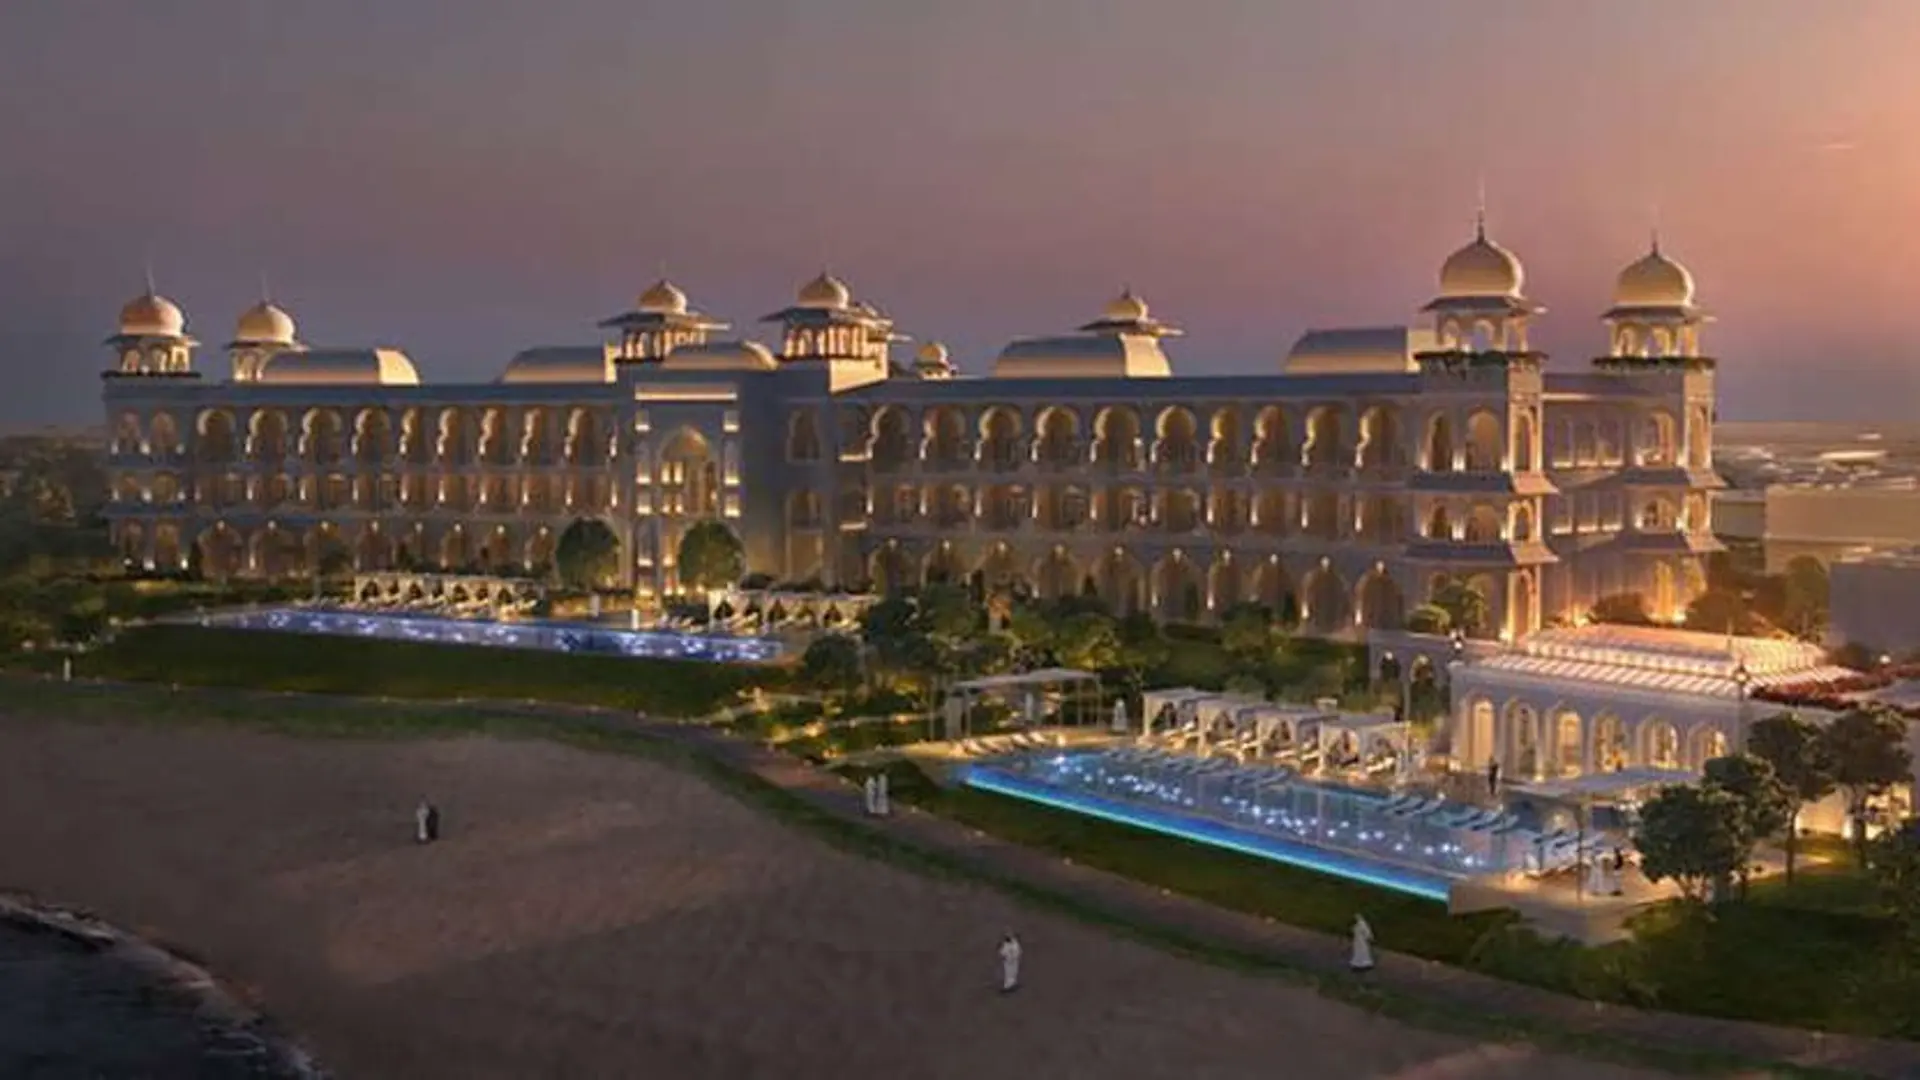 Hotels News - GHM to open a Chedi resort in Qatar